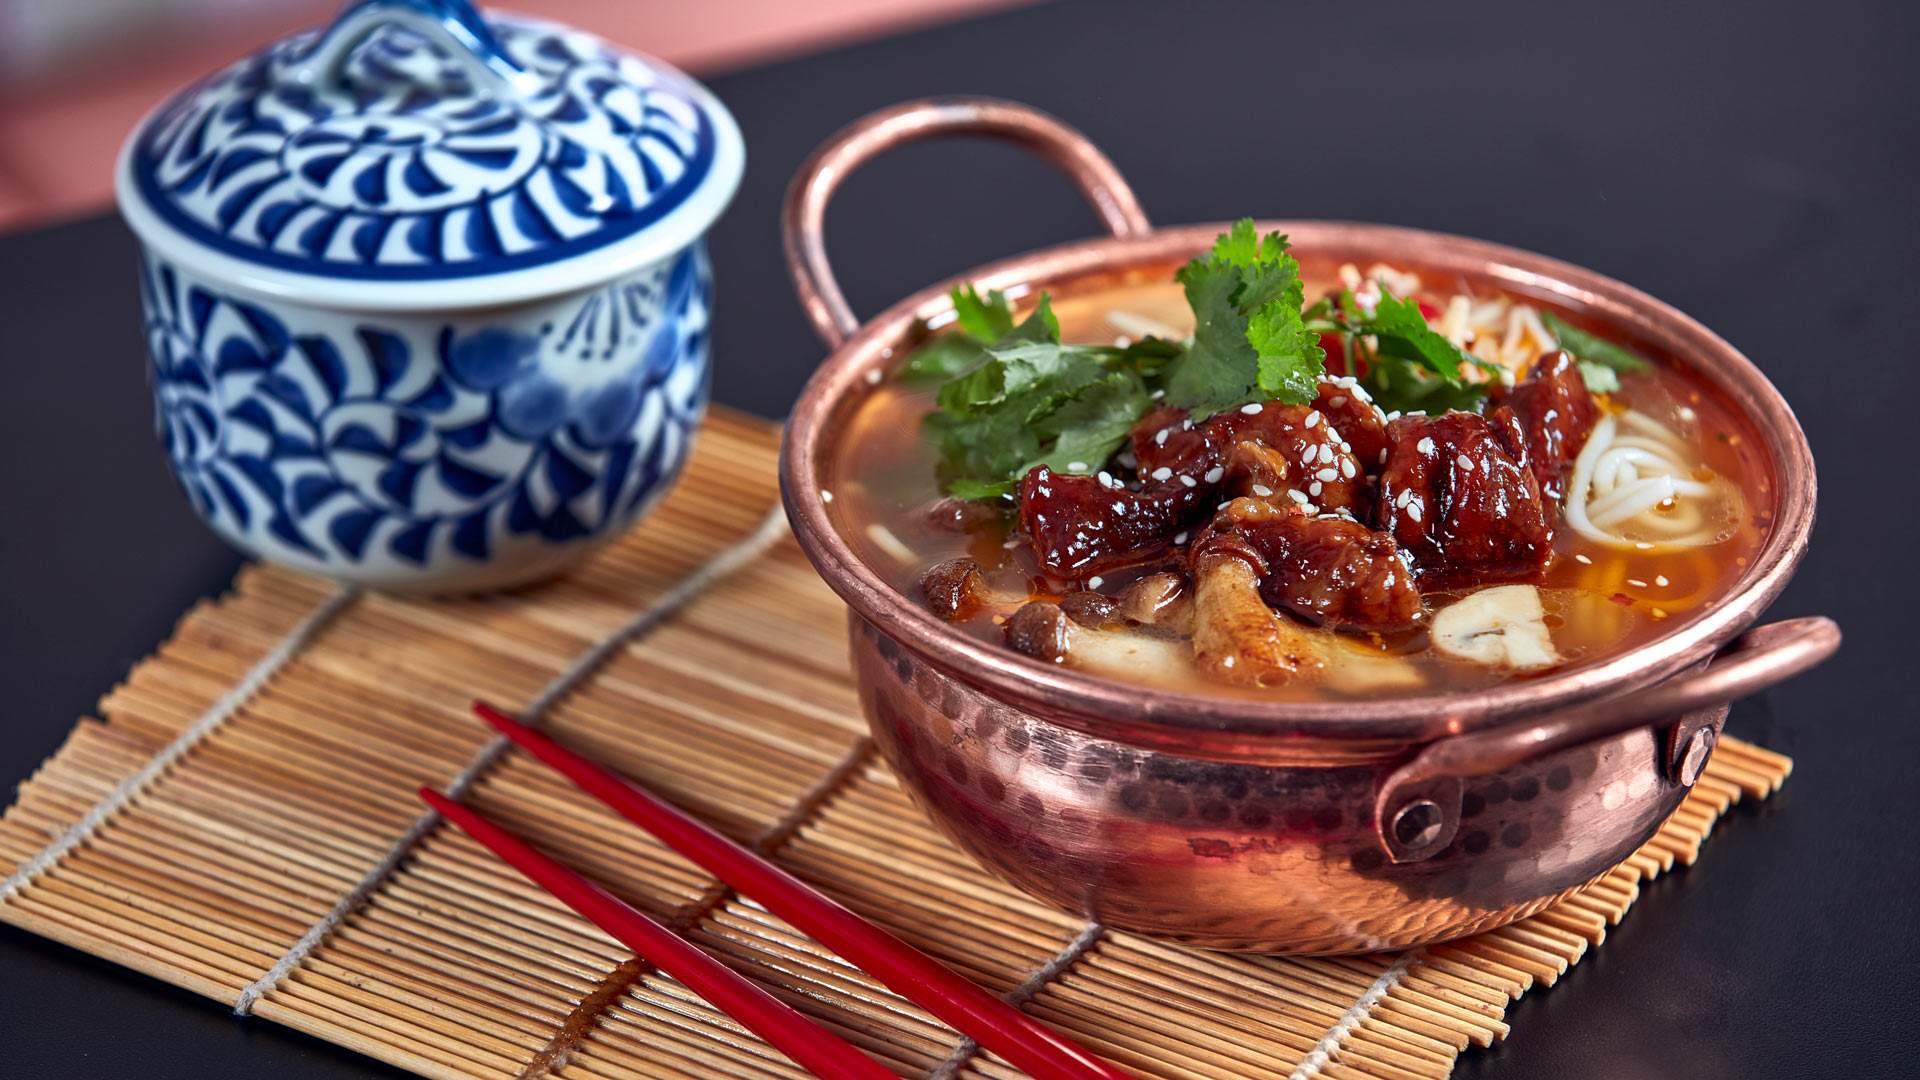 Hawthorn's New Chinese Eatery Naxi Folk Brings a Taste of Yunnan To Melbourne